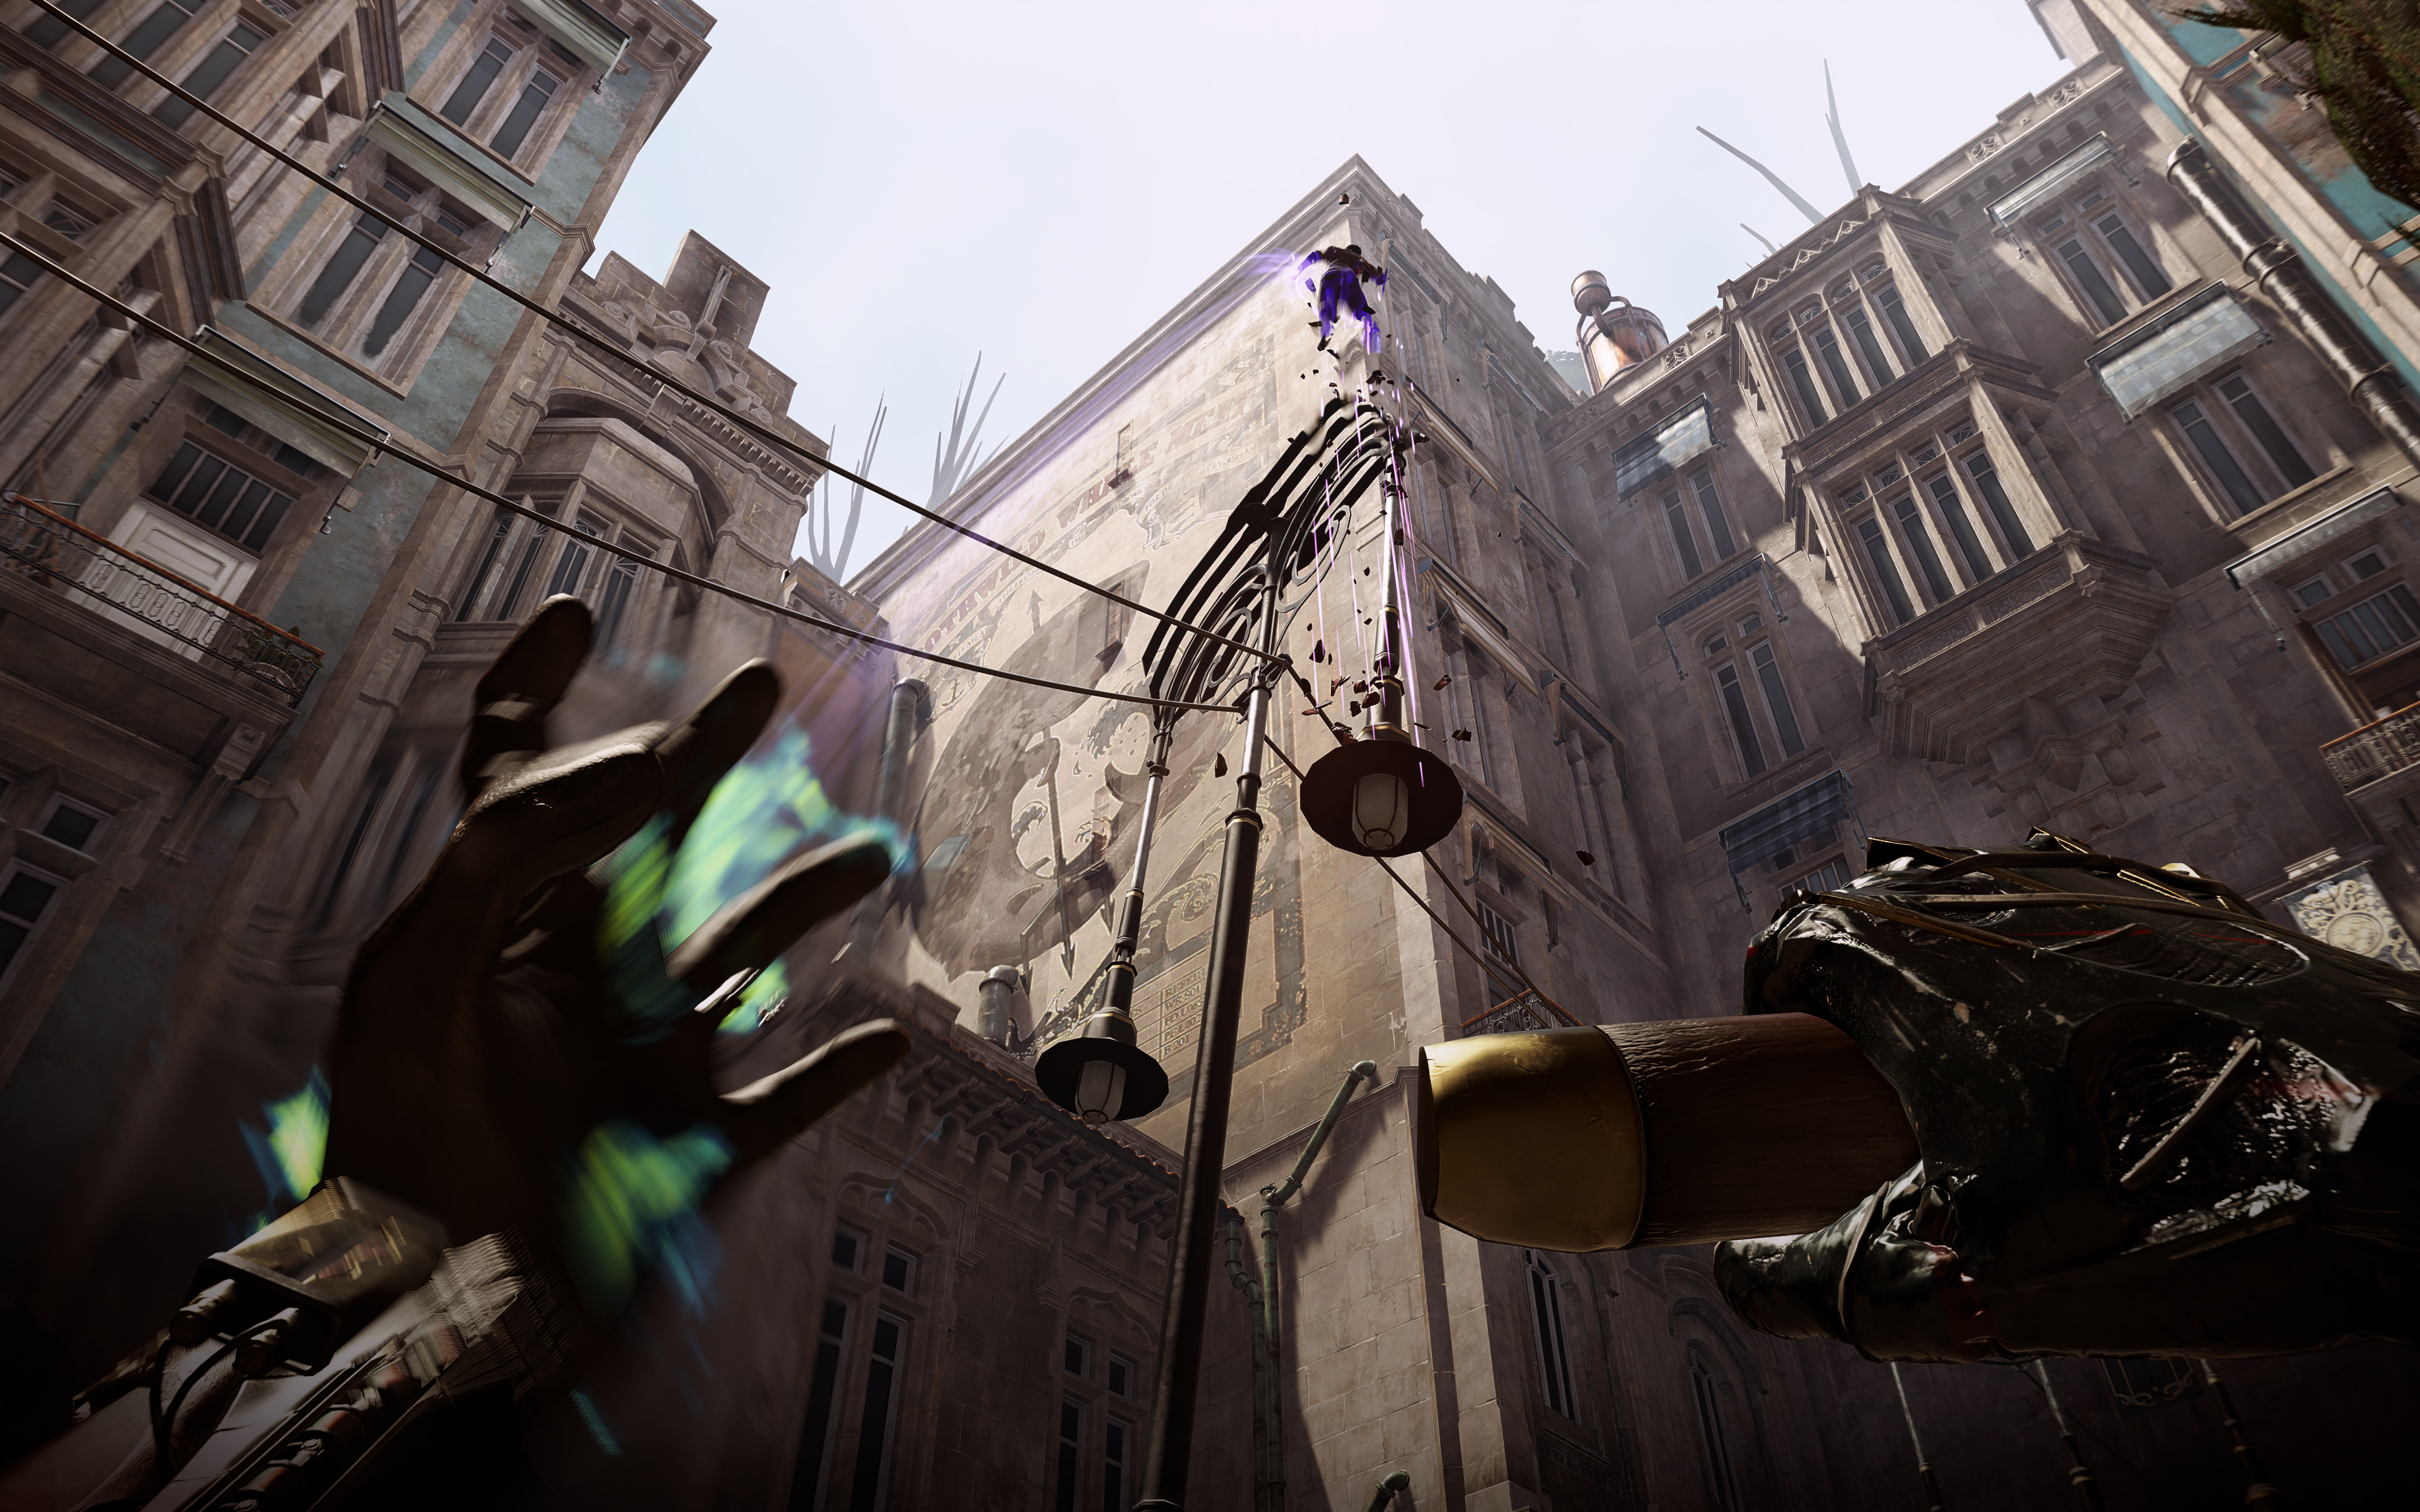 Screenshot from the expansion release Dishonored: Death of the Outsider